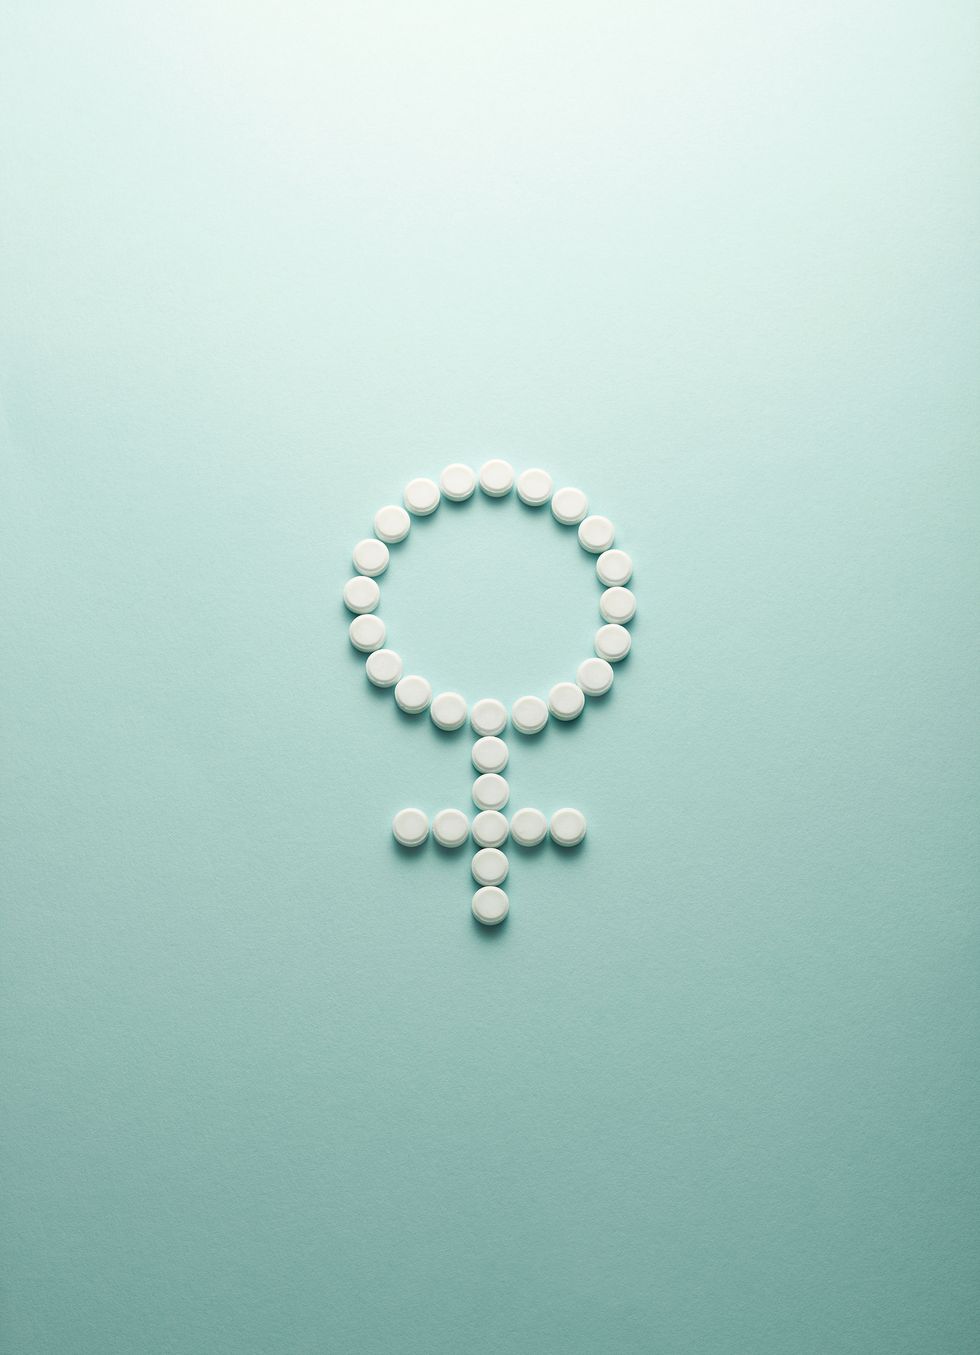 Female symbol made up of contraceptive pills